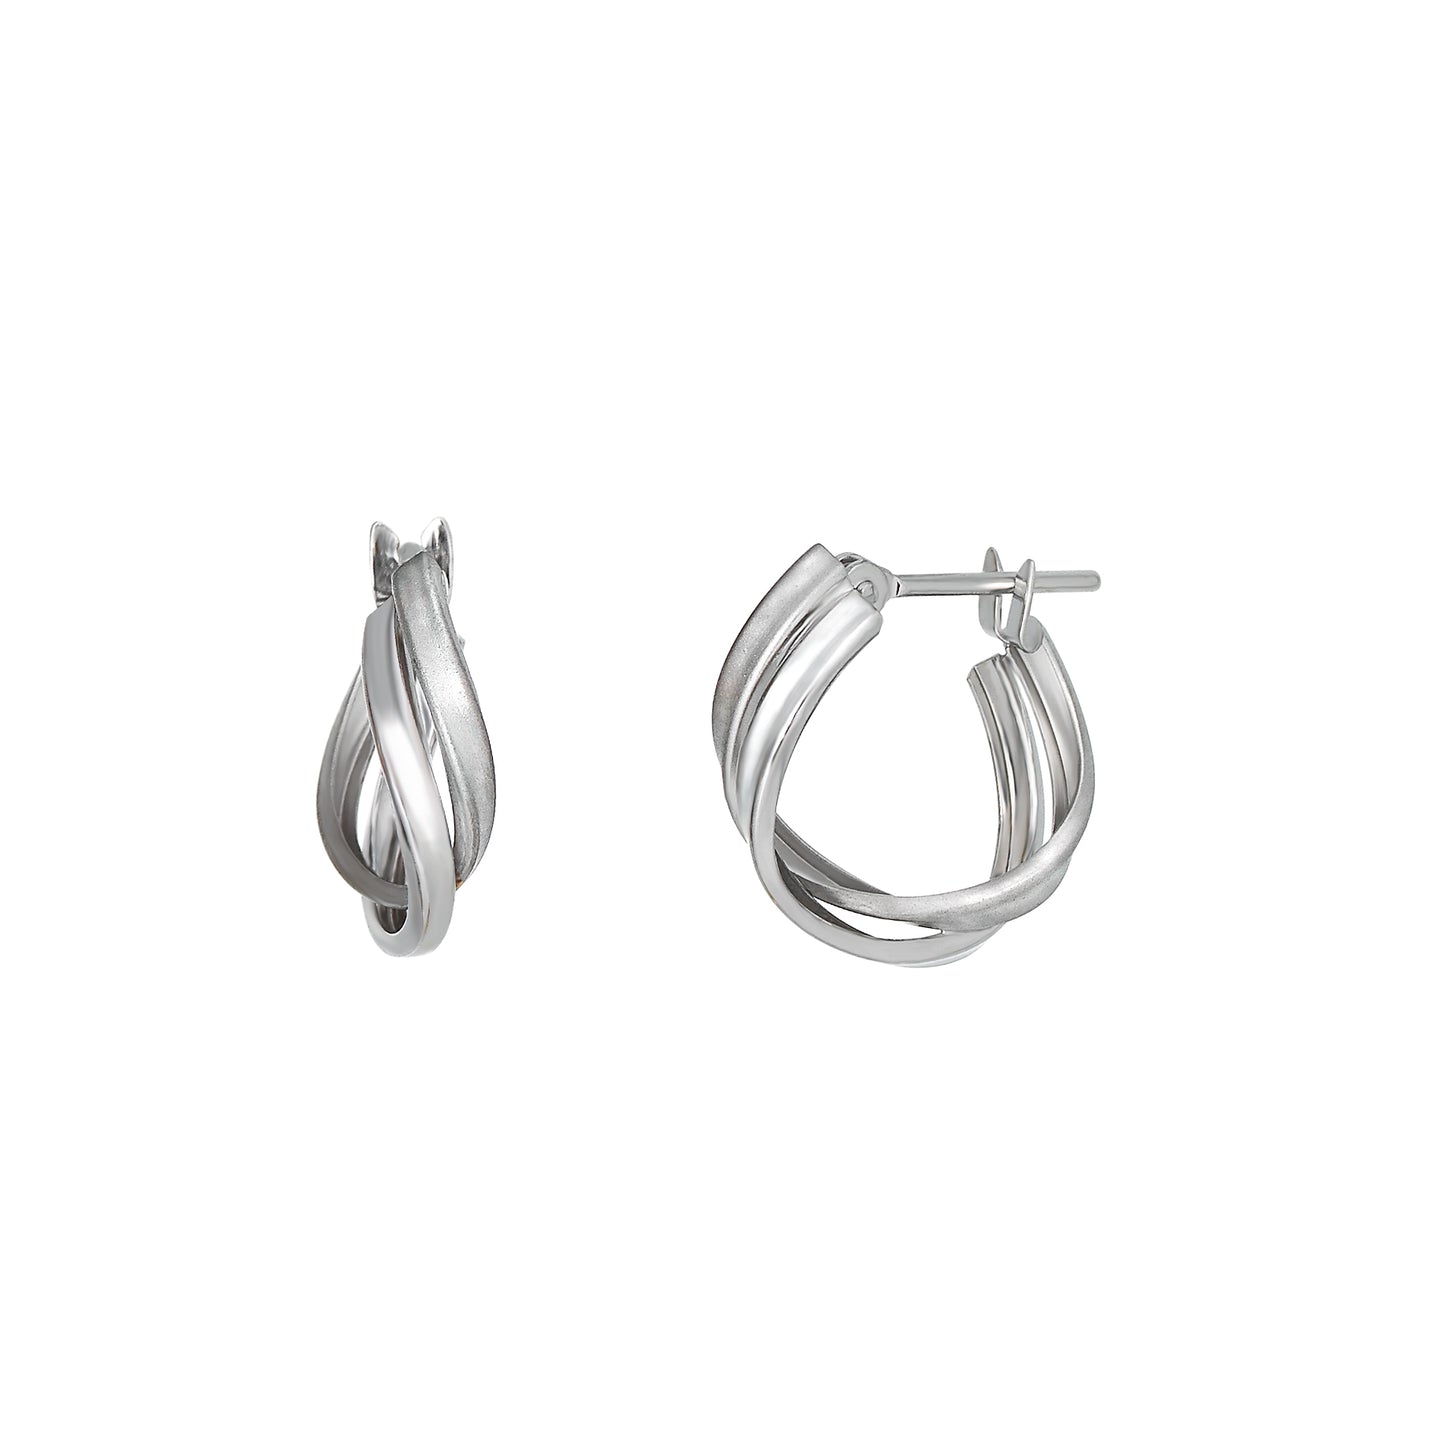 14K/10K White Gold Twisted Twin Hoop Earrings - Product Image